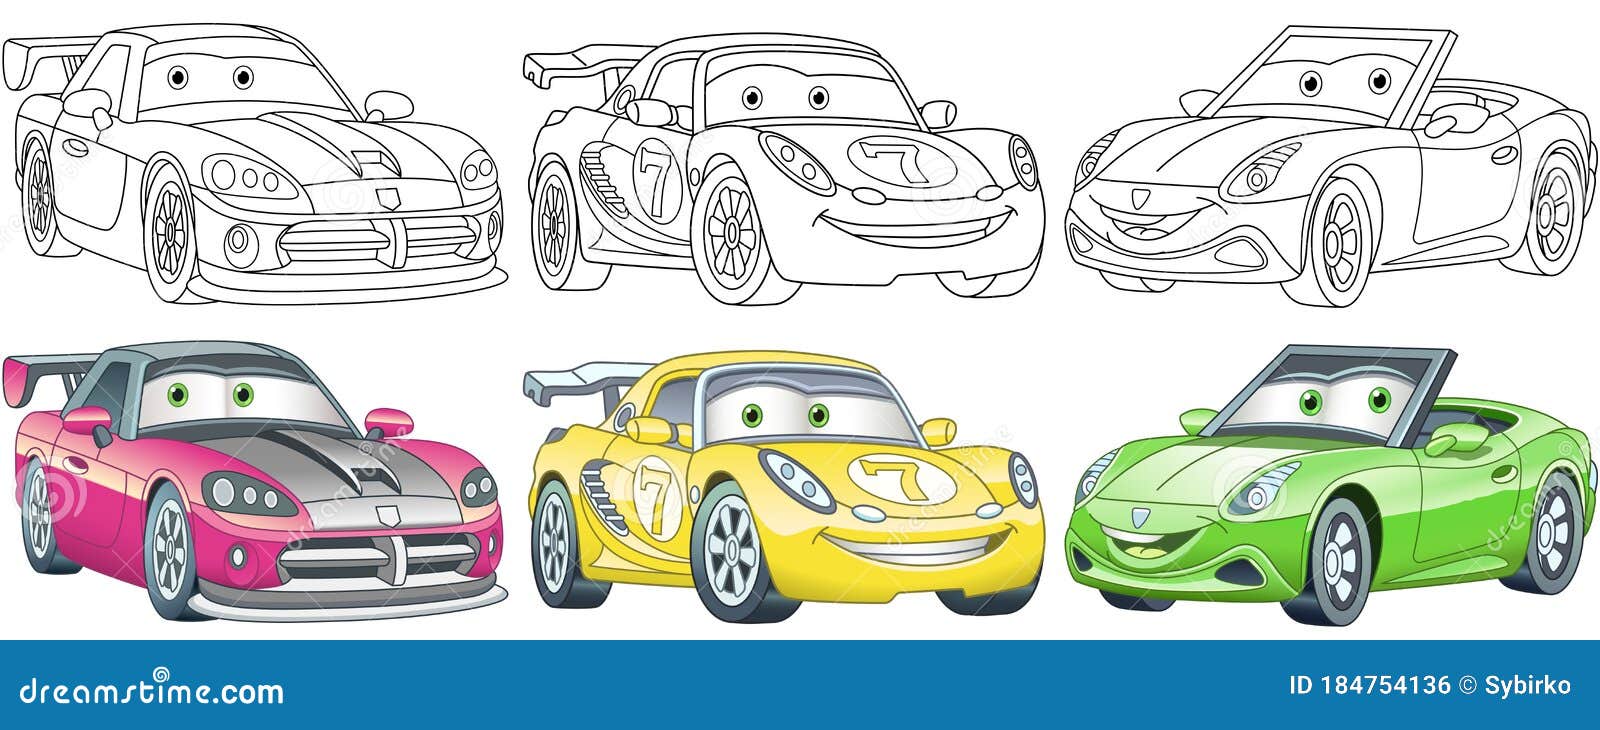 Cartoon Cars Coloring Pages Set Stock Vector   Illustration of ...